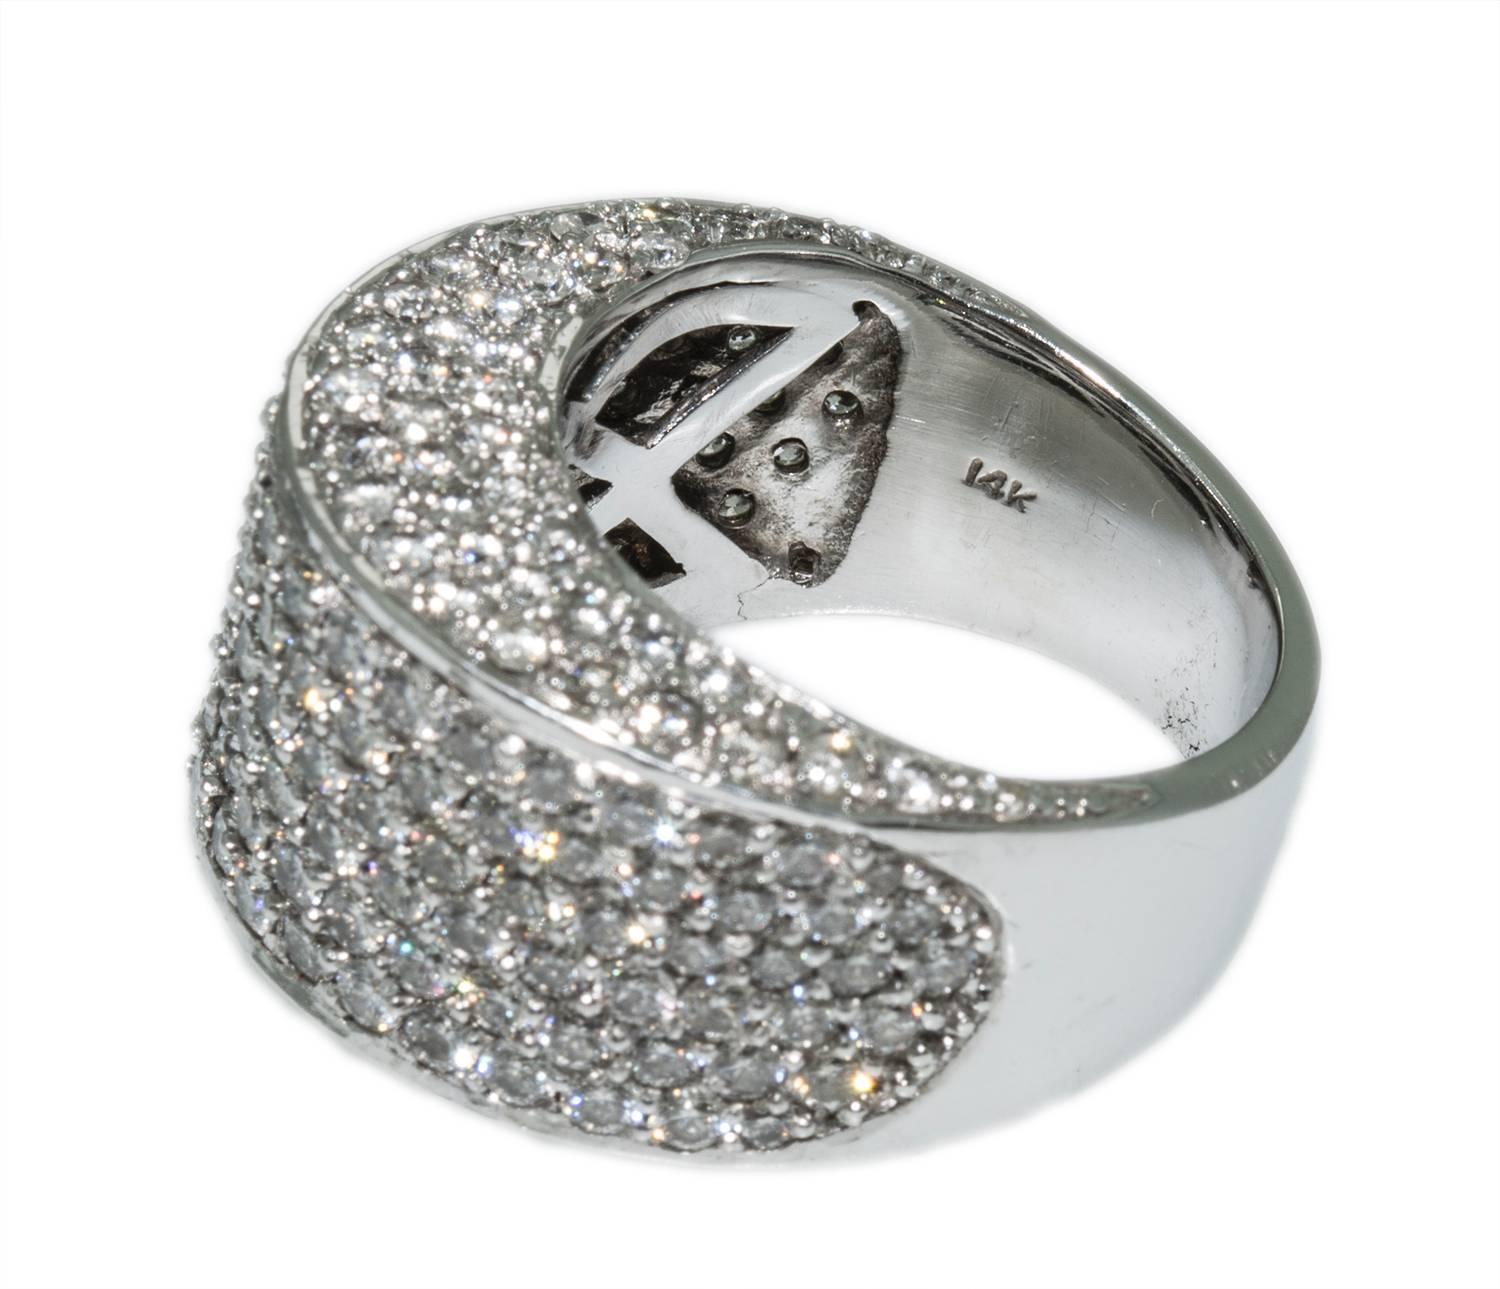 This brilliant ring is set in 14k white gold and holds 5ct. of bright white bead set diamonds (G-H, SI) The domed design is encrusted with diamonds which drape down over the finger. This ring currently measures size 8 and can be made smaller with